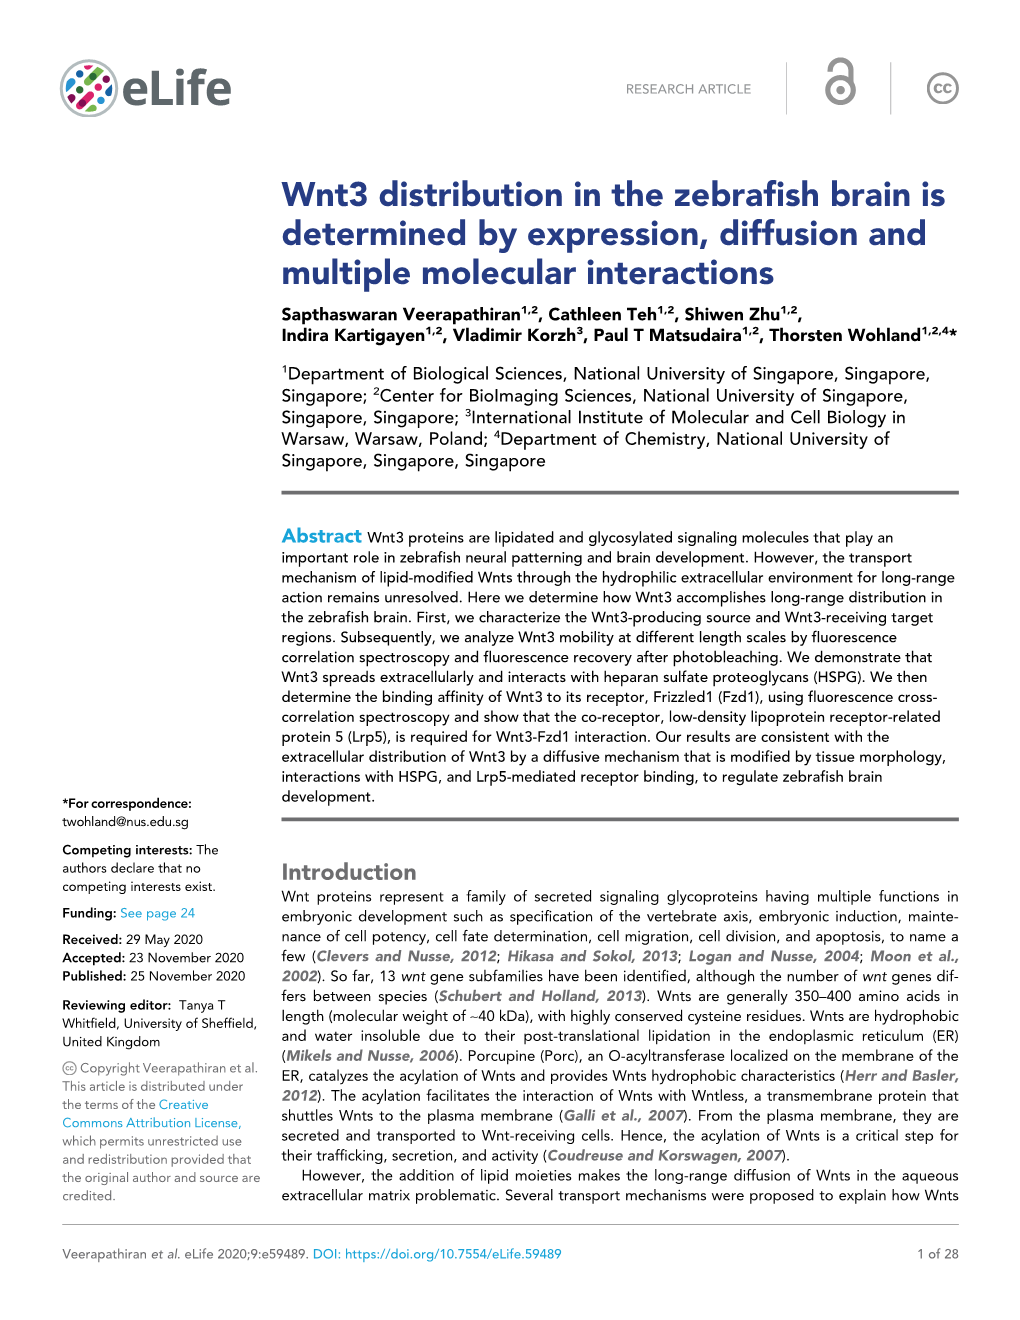 Wnt3 Distribution in the Zebrafish Brain Is Determined by Expression